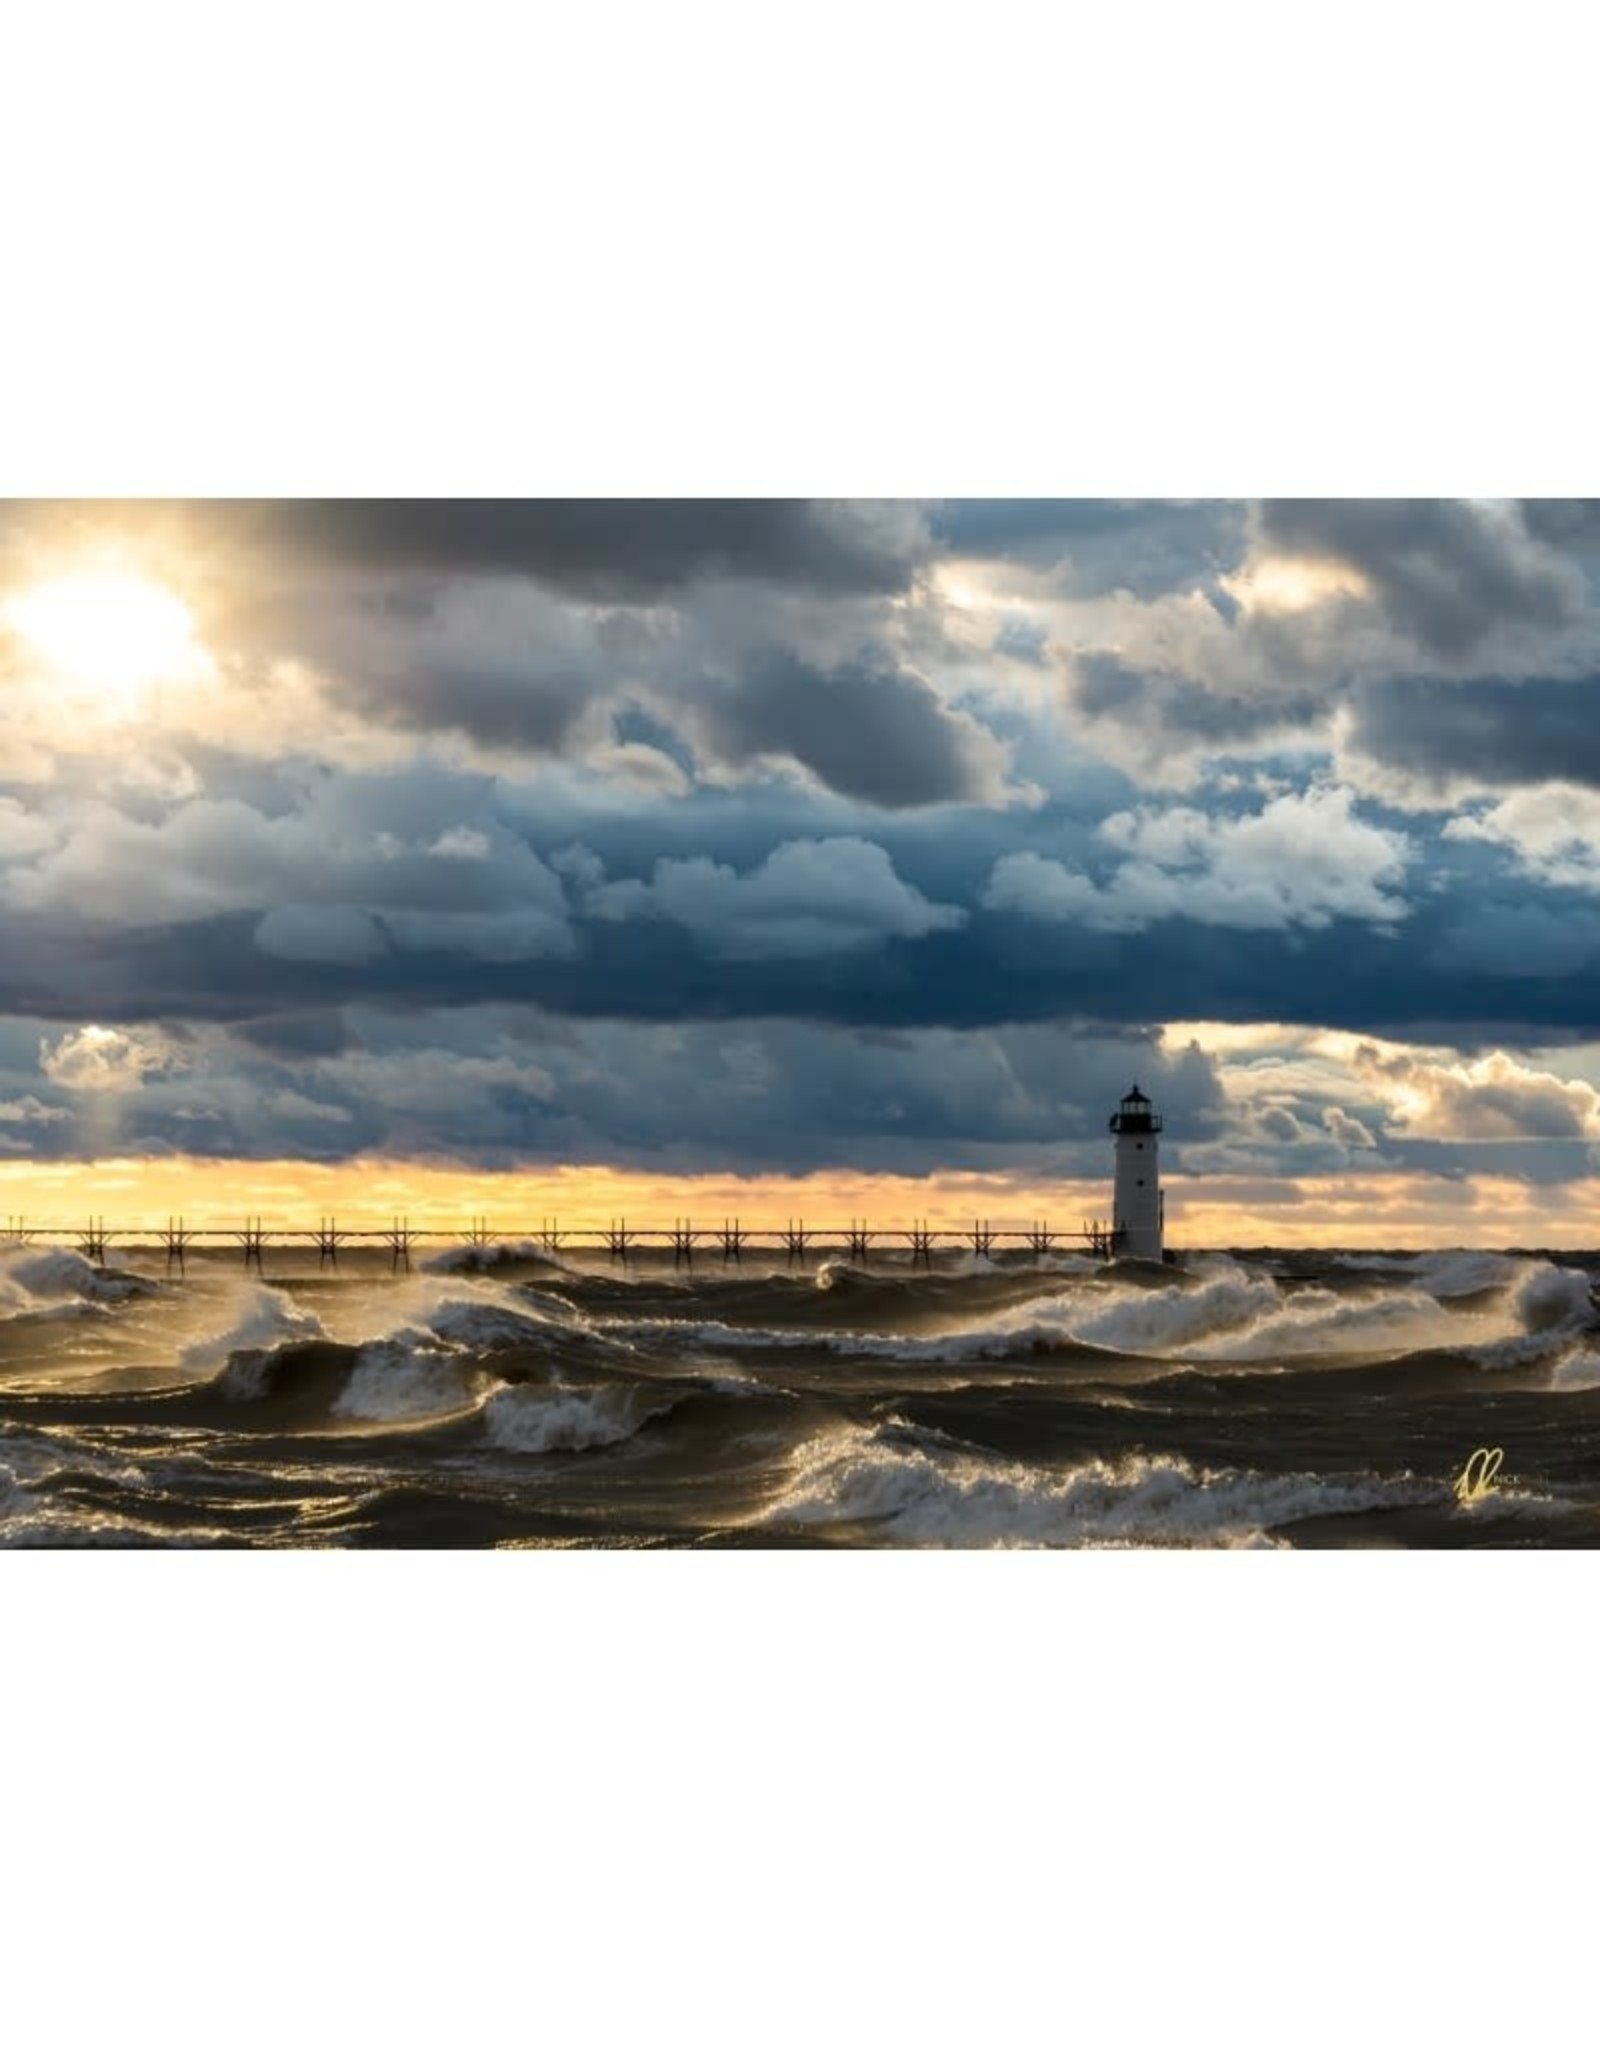 Nick Irwin Images Manistee Lighthouse